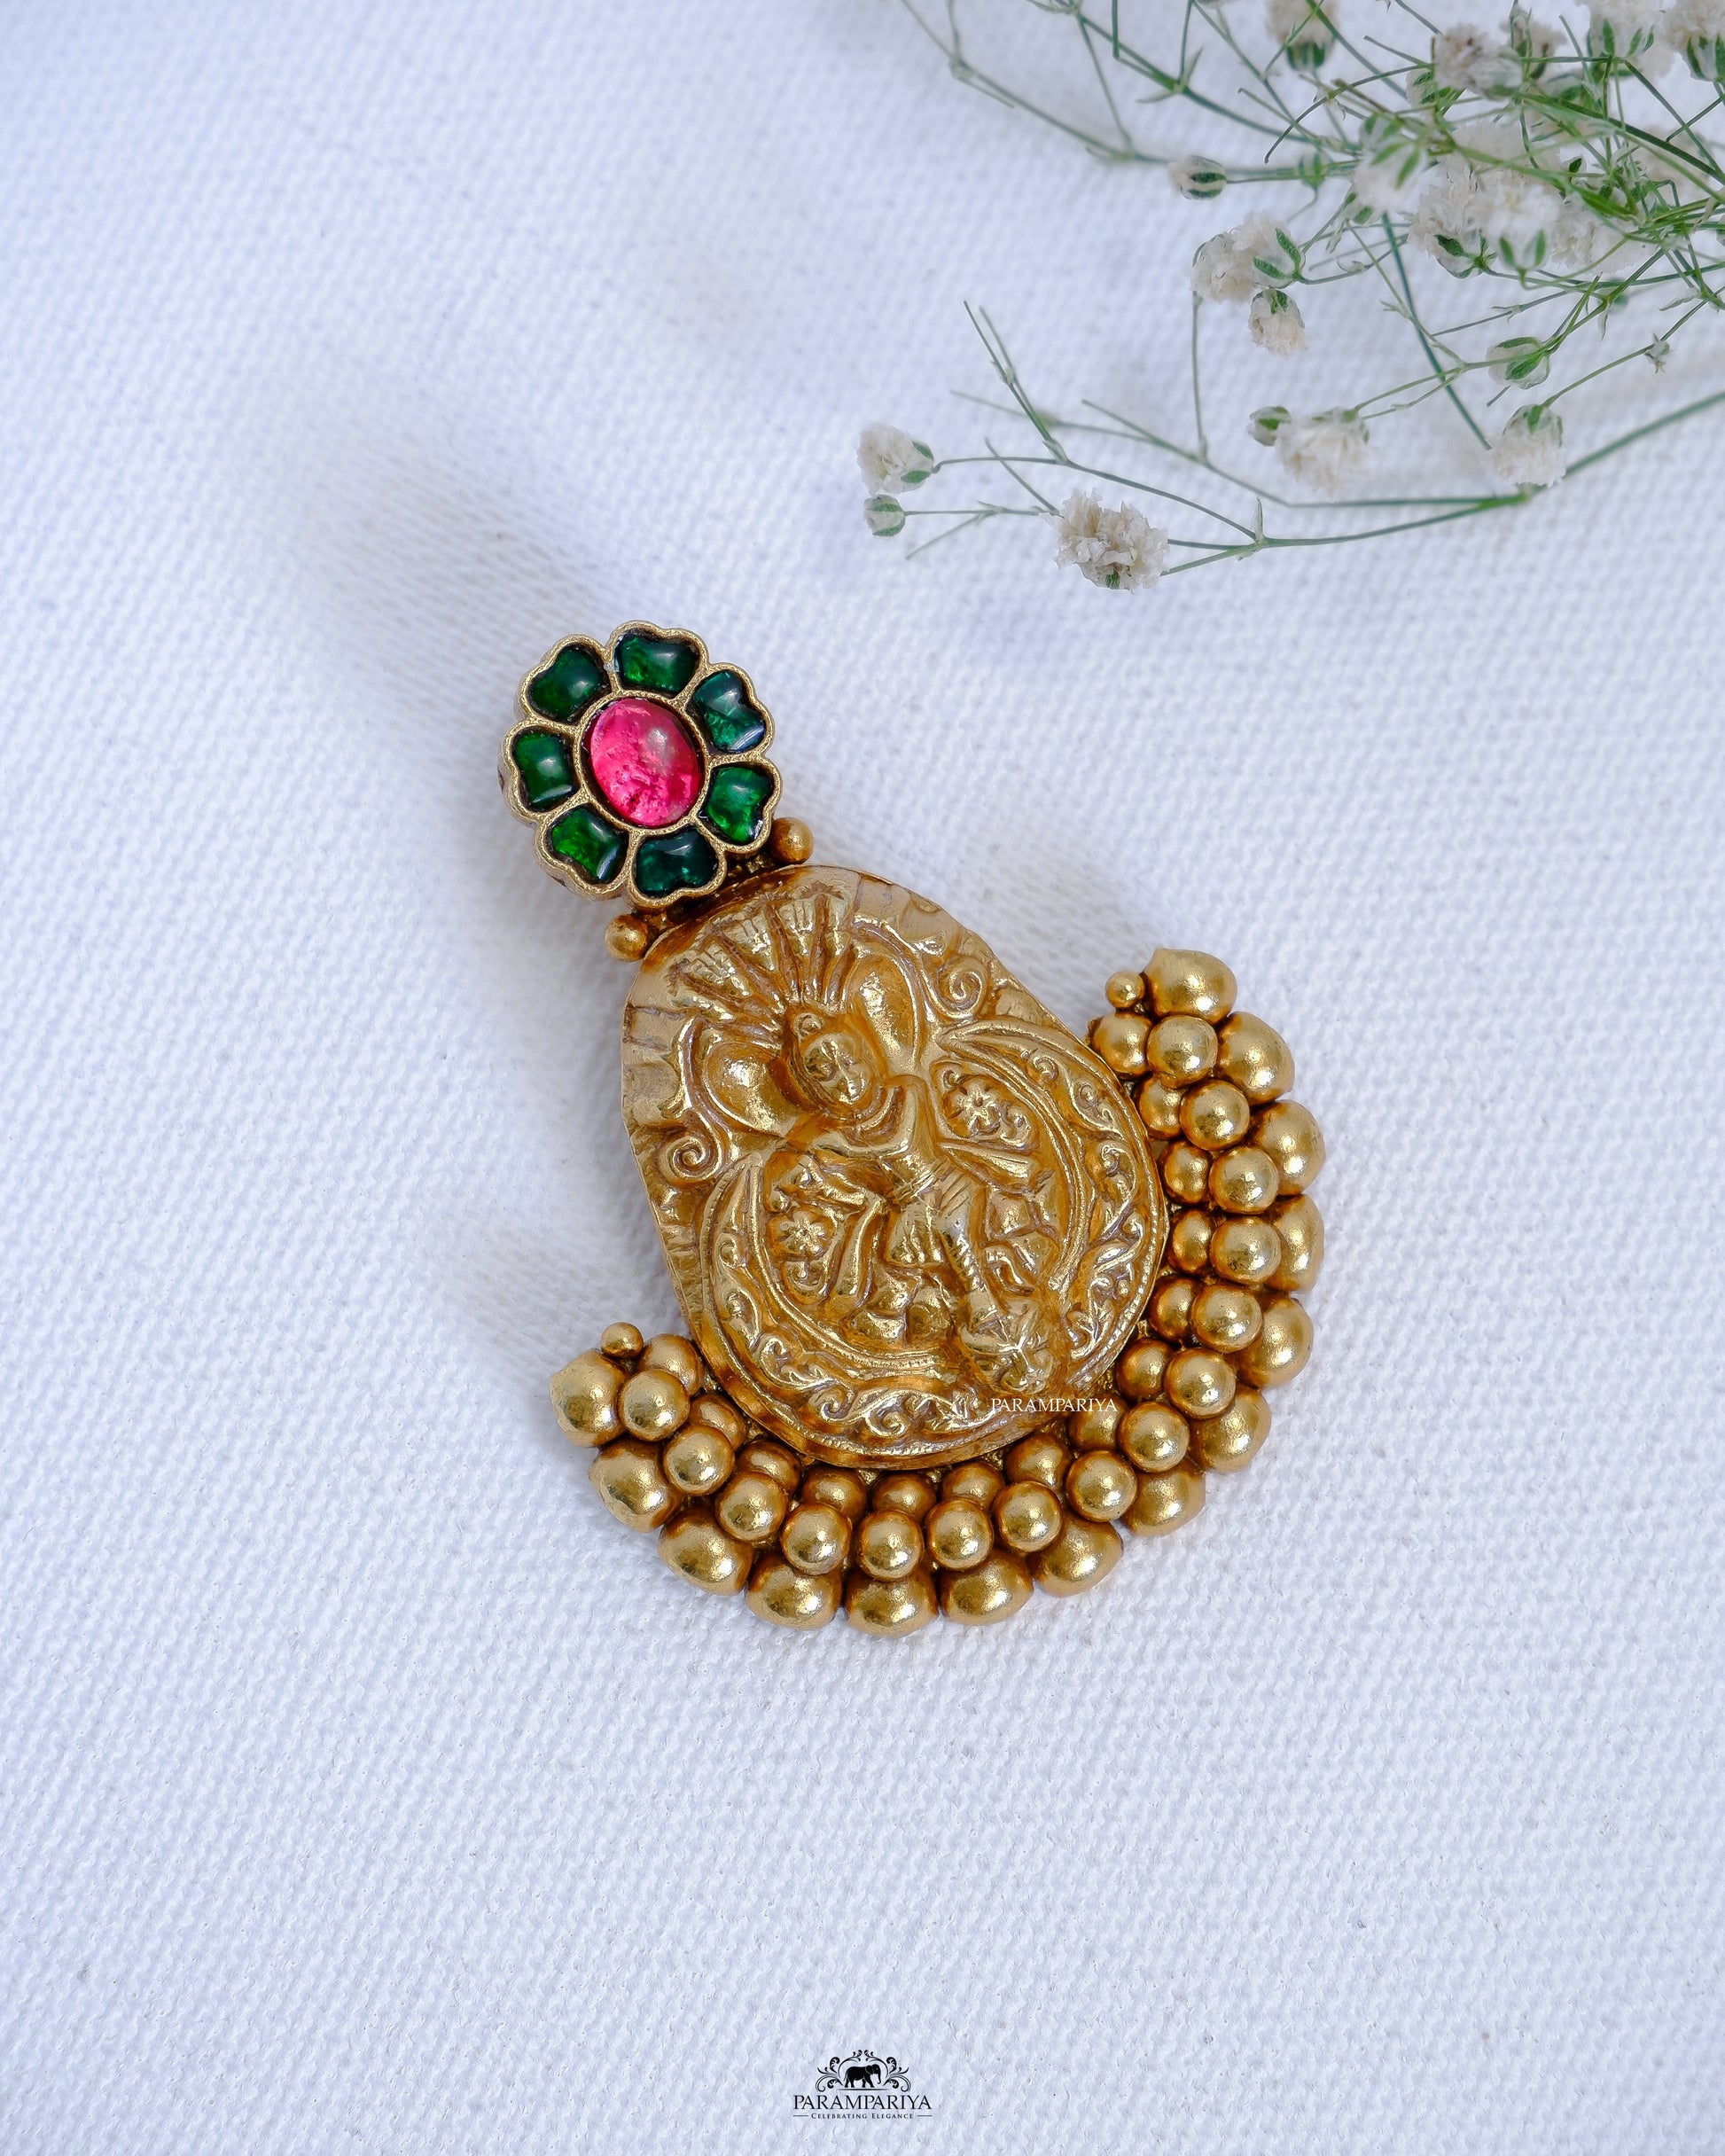  This pendant features an intricate vintage-style design in gold micron-plated pure silver with kundan stones for a timeless, luxurious look. The precise detailing ensures long-lasting quality and beauty.